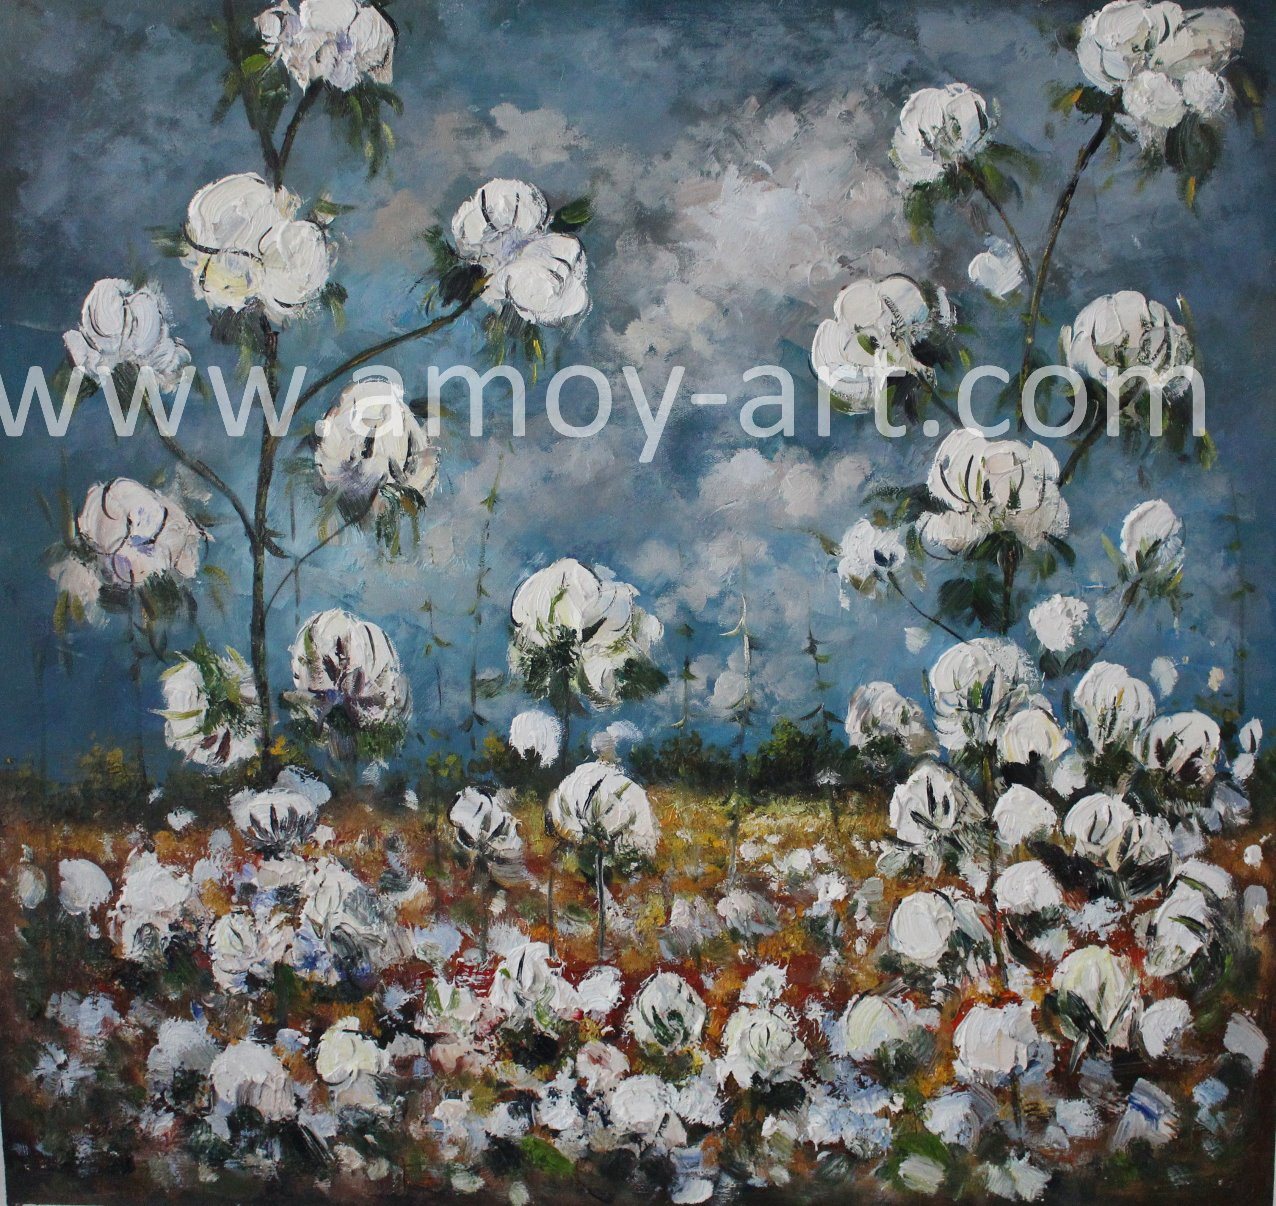 Handmade Farm Canvas Art Cotton Field Palette Knife Oil Paintings with Textural Effect for Home Decor